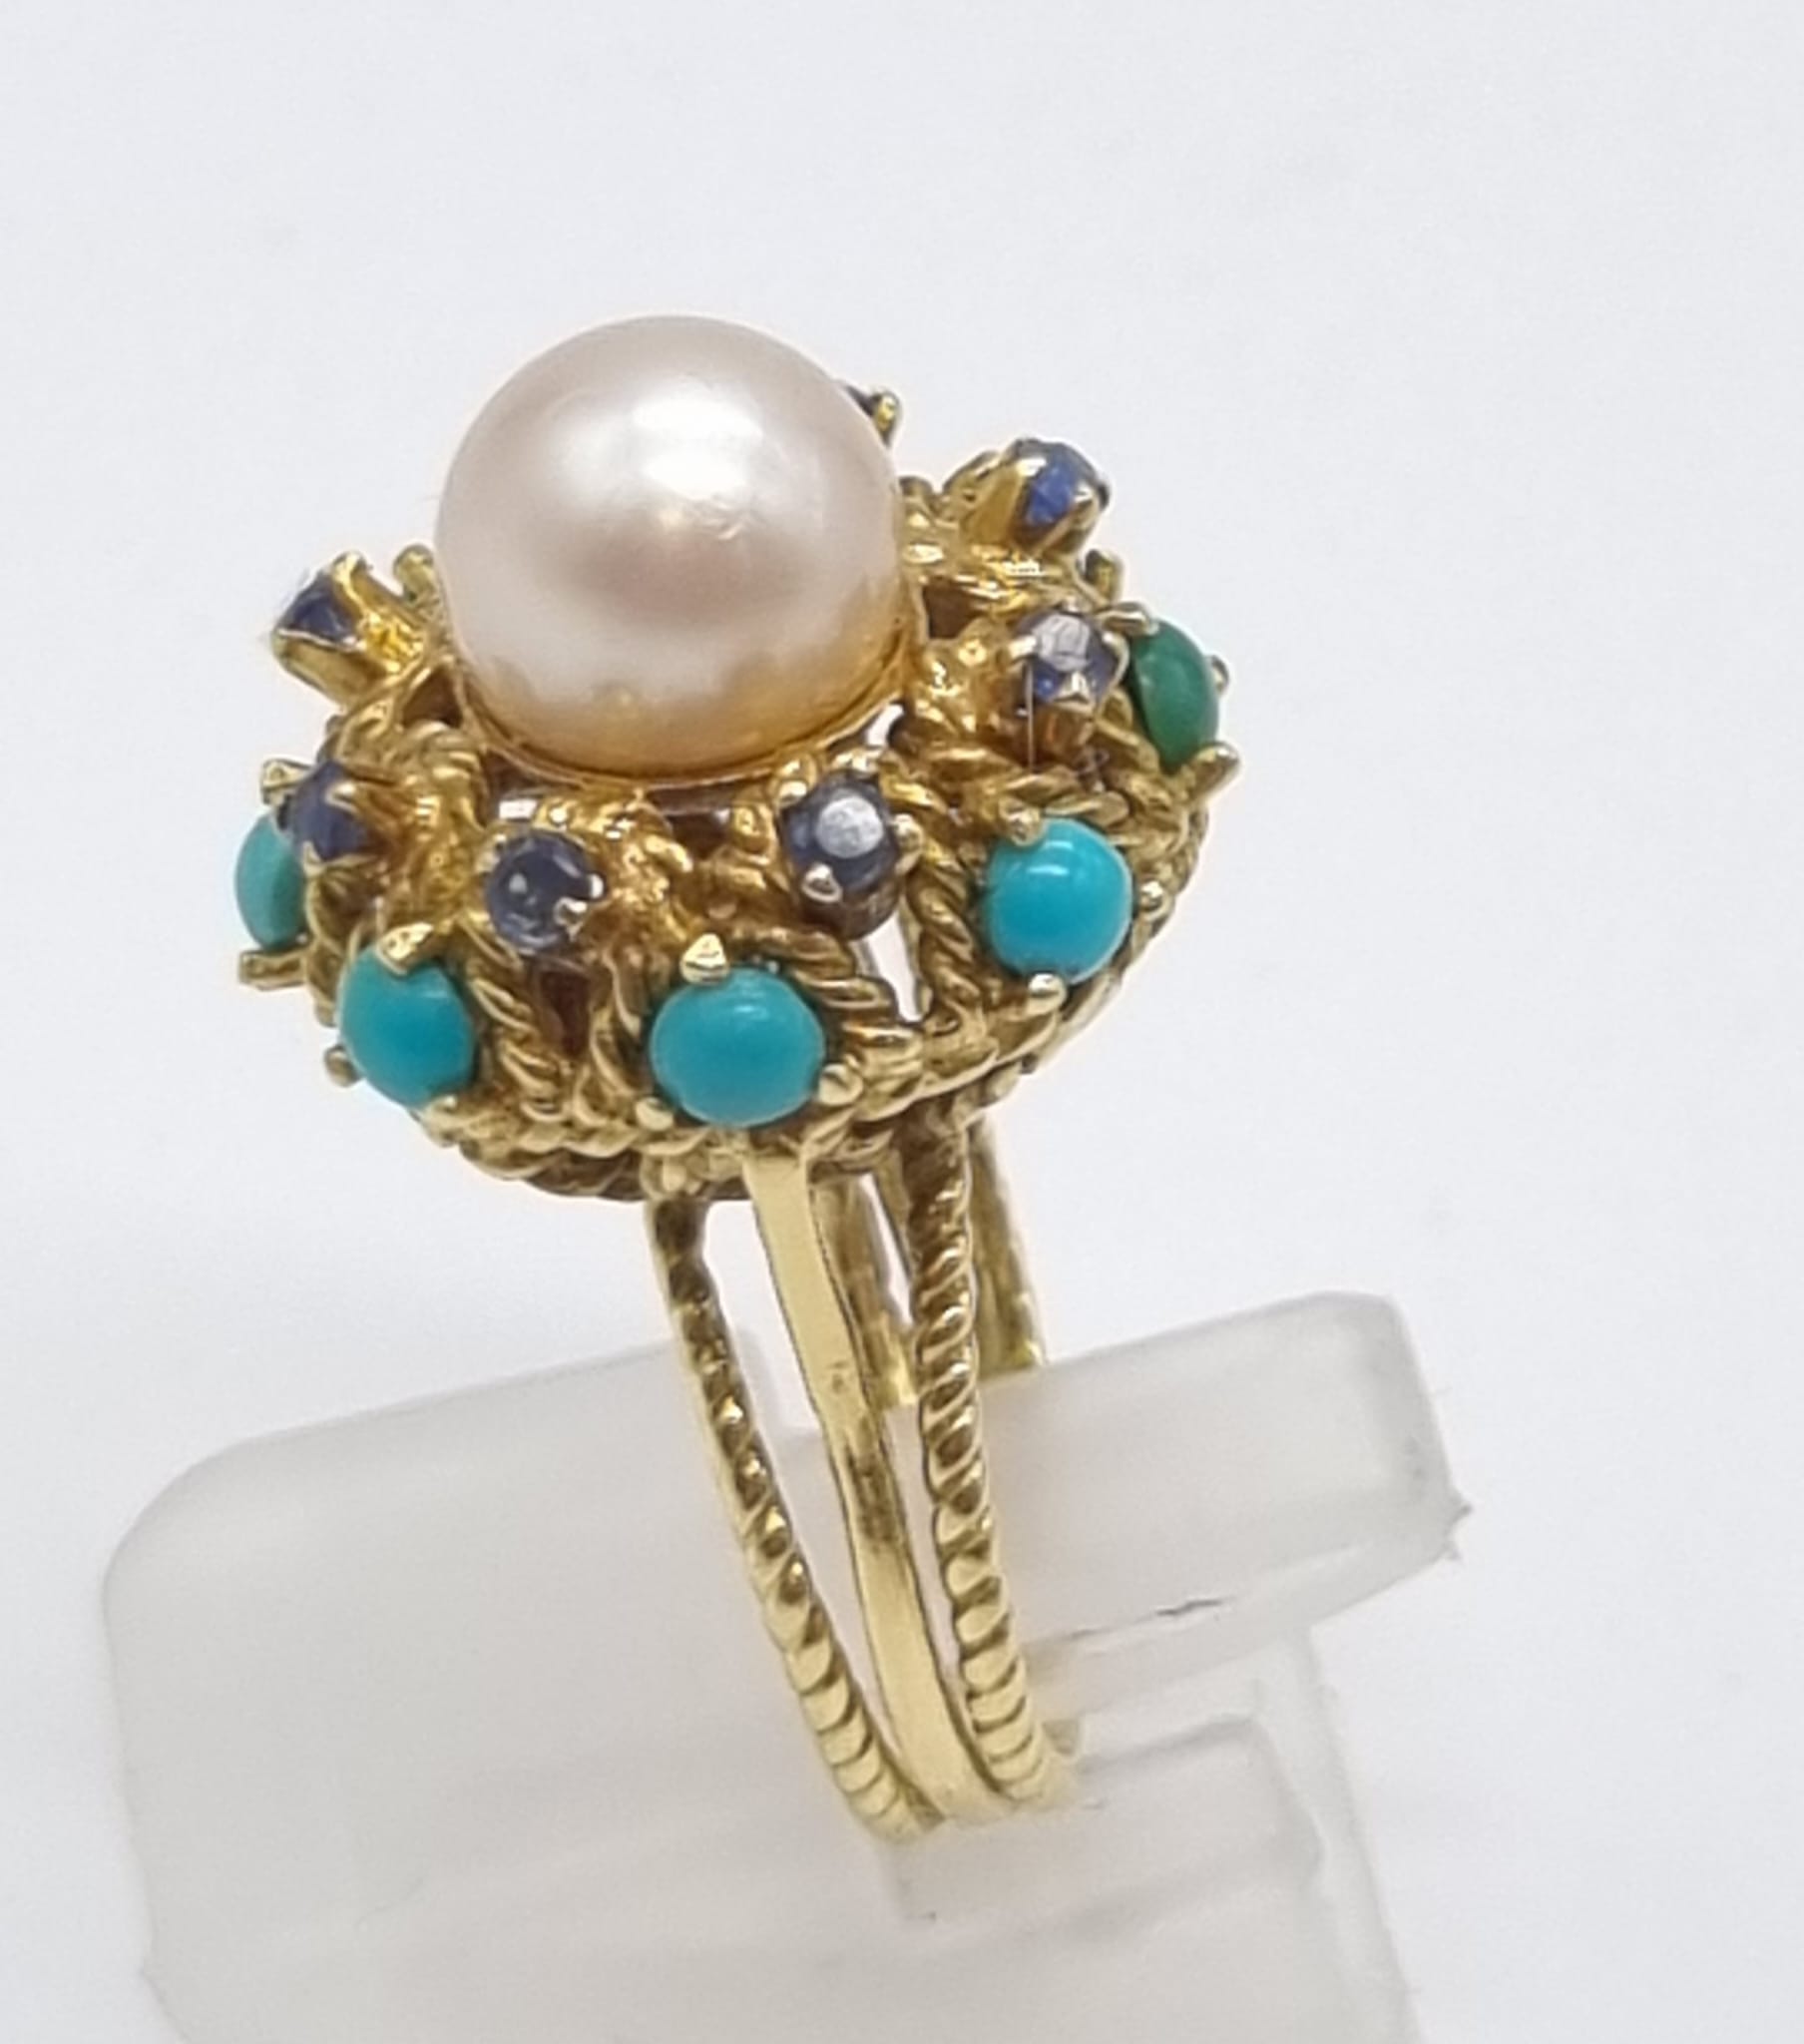 A Wonderful Vintage Possibly Antique 18K Yellow Gold, Turquoise and Pearl Ring/Brooch Set. Ring - - Image 5 of 13